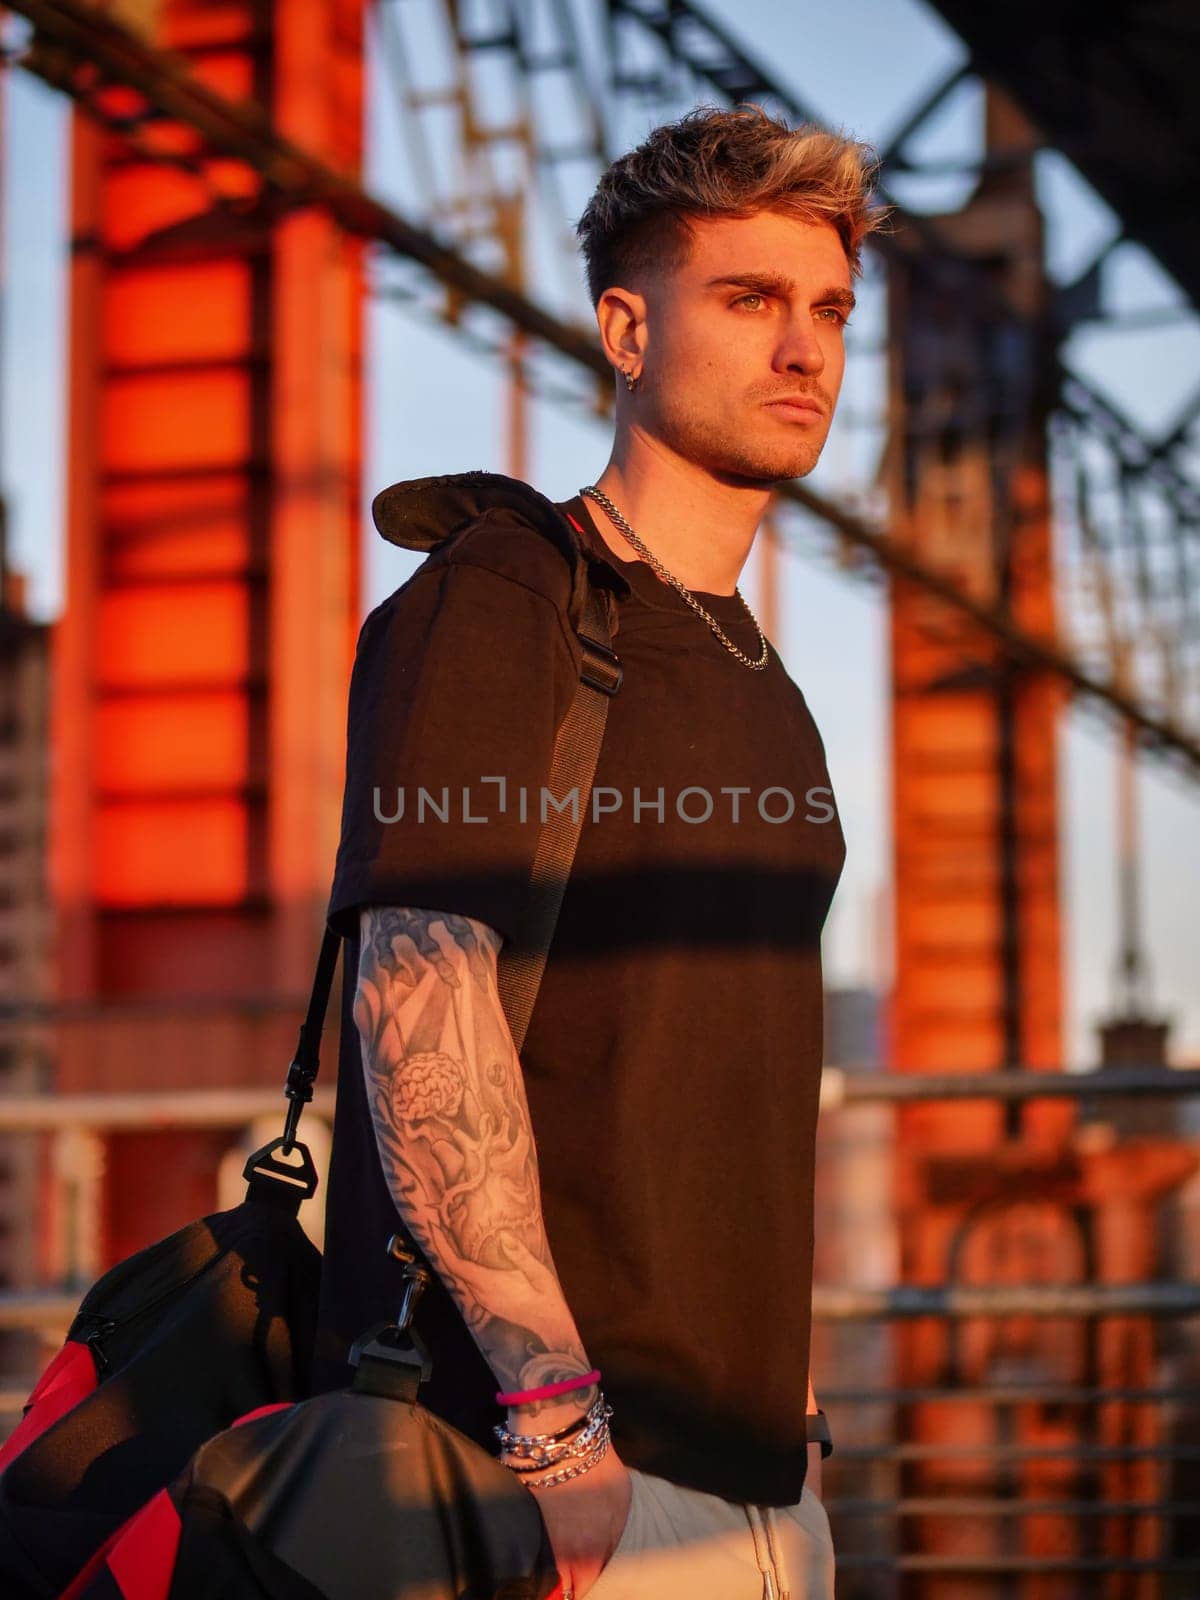 Man with tattoo standing in front of building by artofphoto